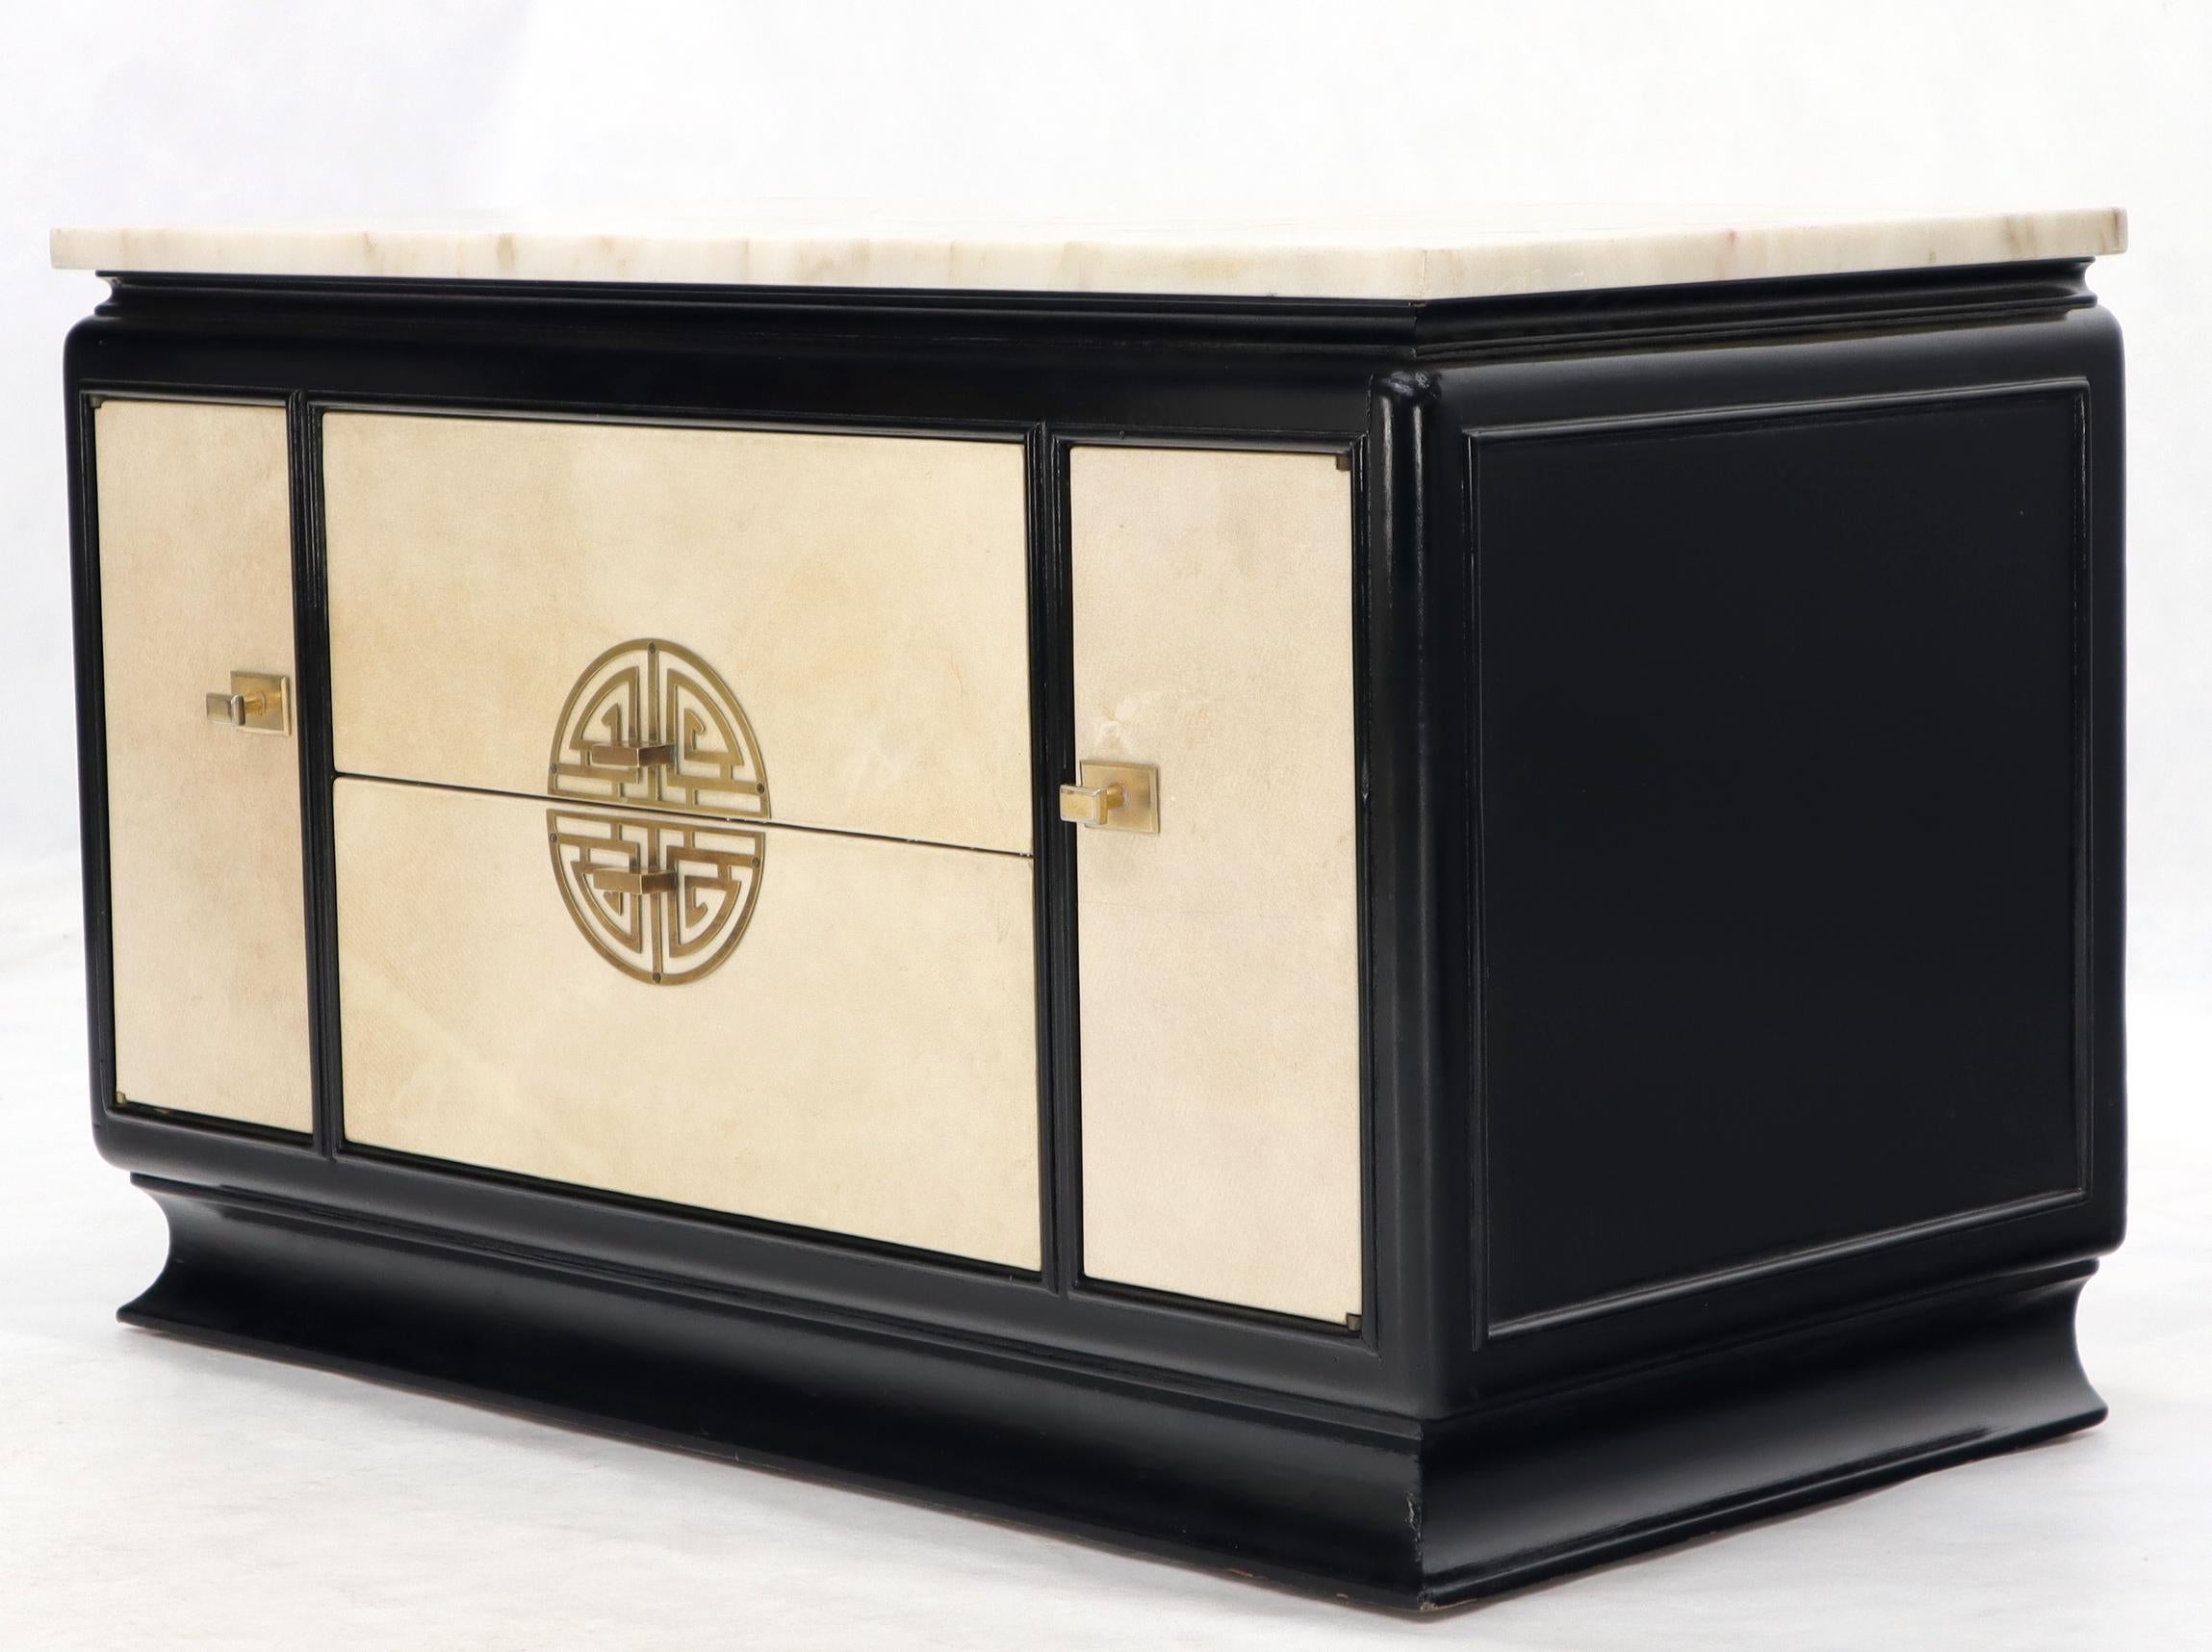 Pair of Italian Mid-Century Modern black lacquer parchment doors and drawers brass hardware marble top end tables or night stands.